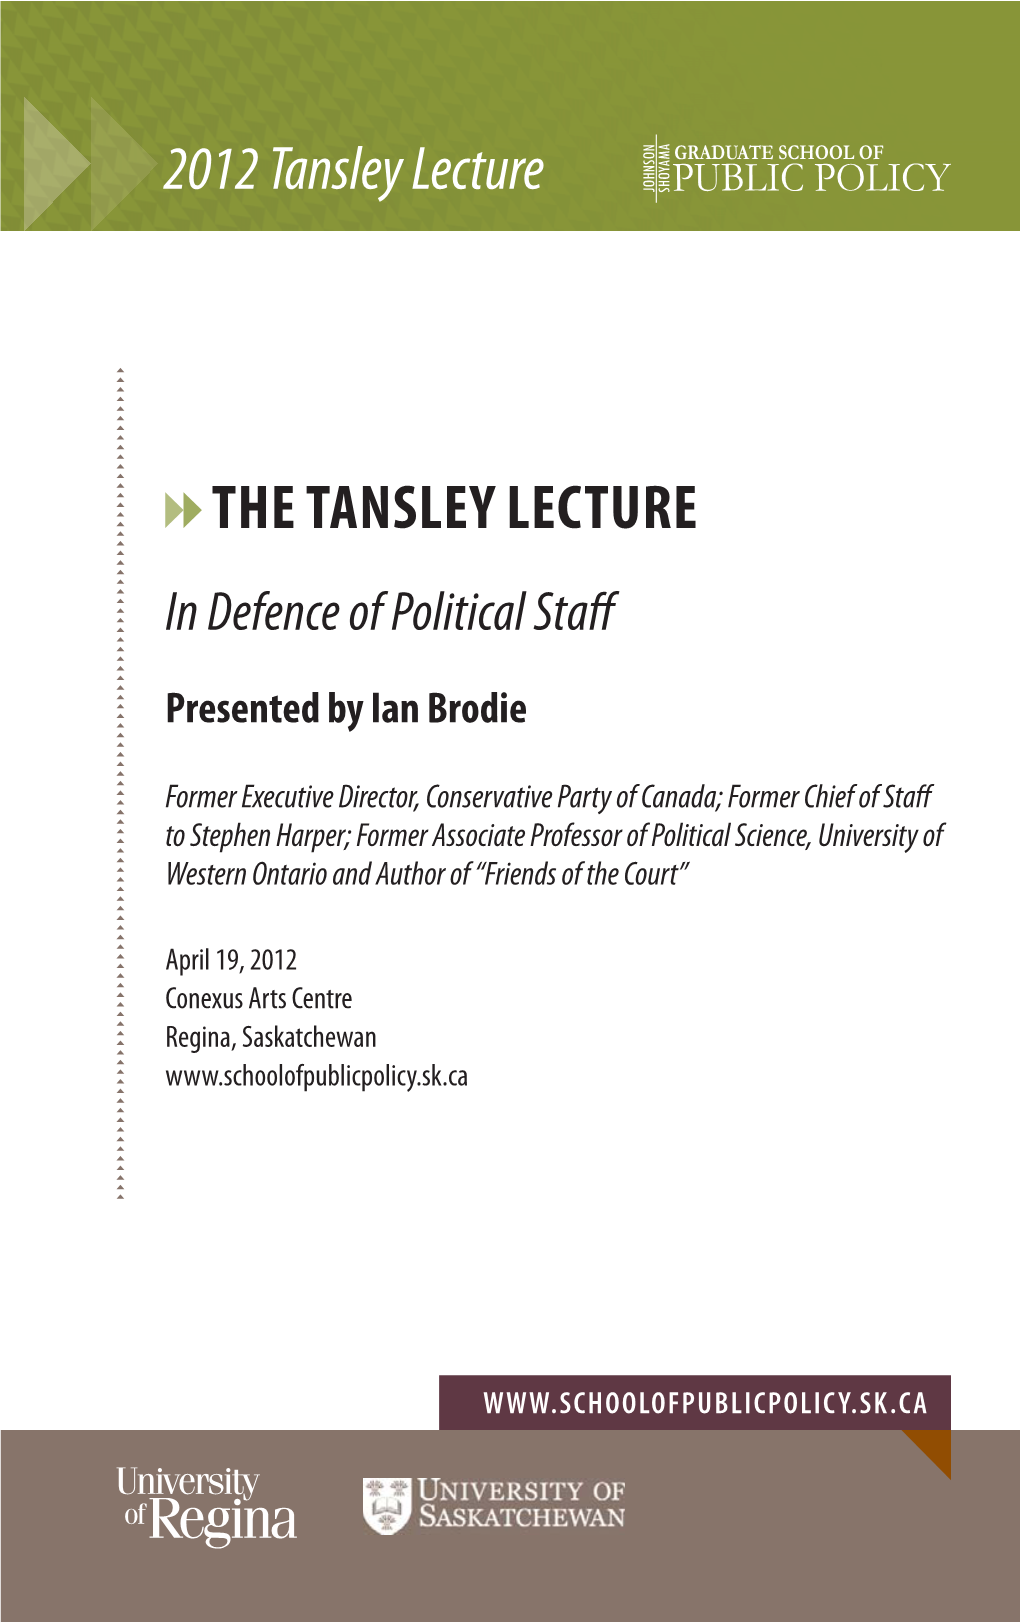 THE TANSLEY LECTURE in Defence of Political Staff